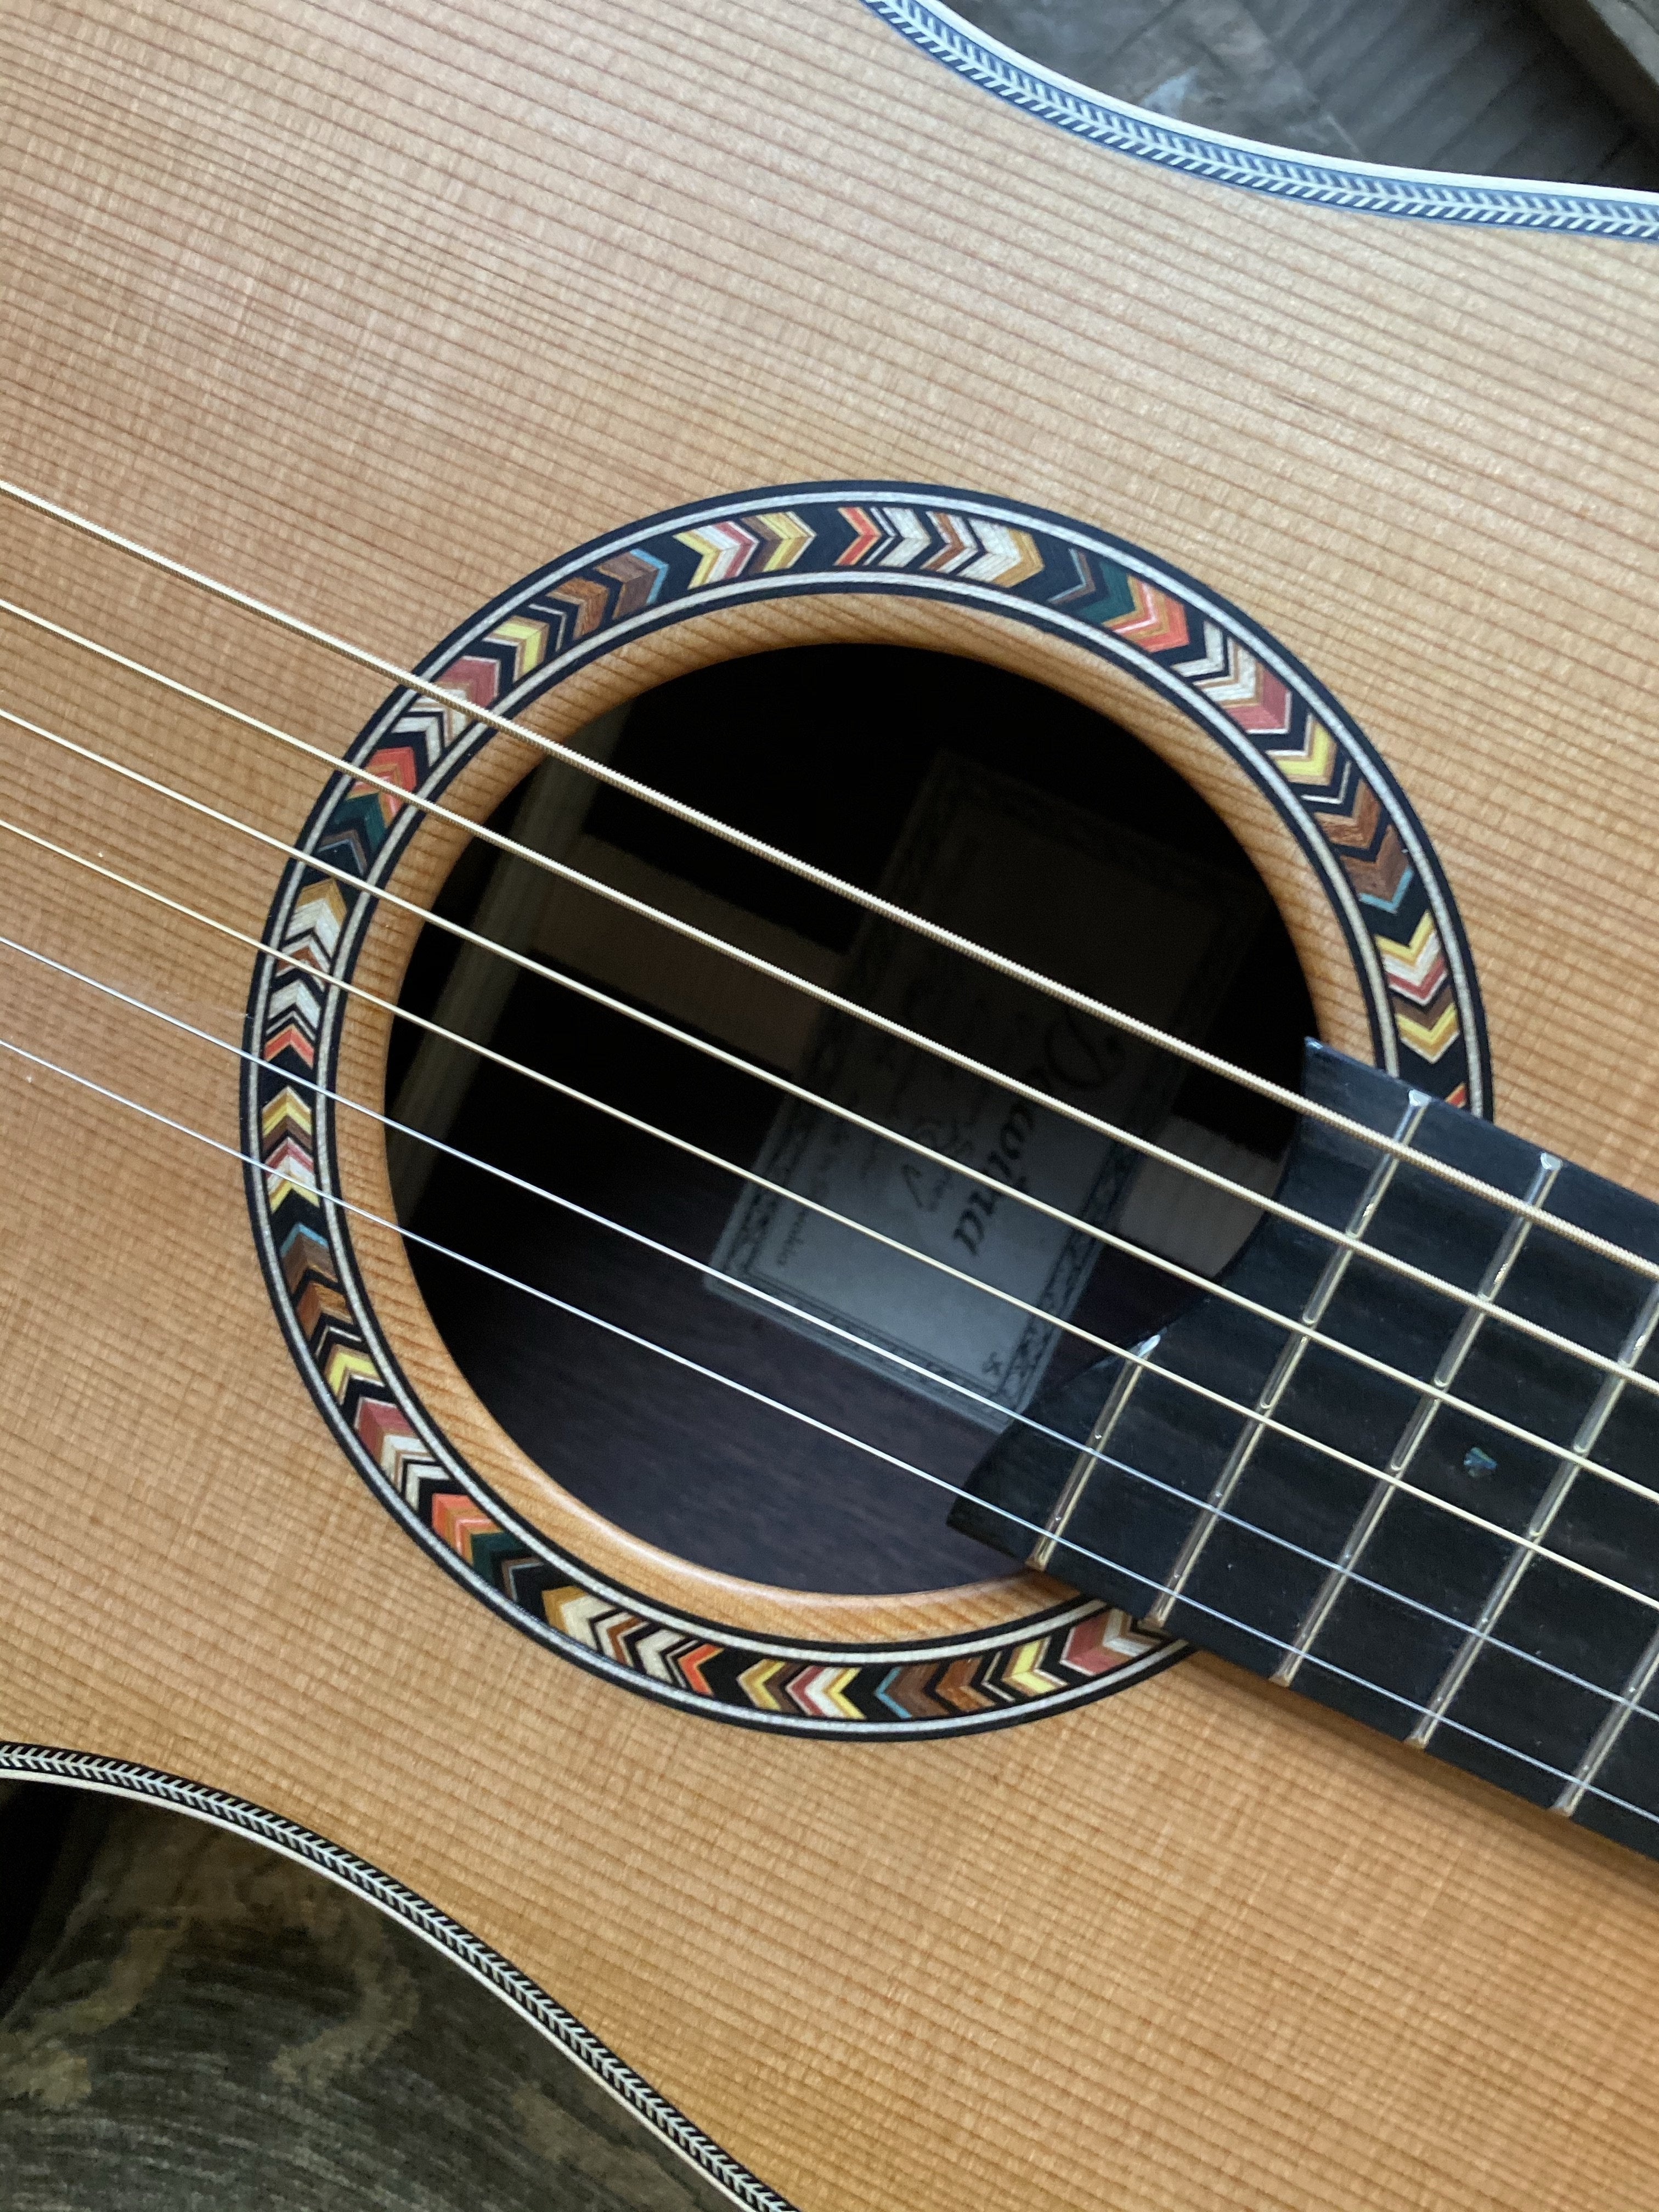 Dowina Rosewood BV, Acoustic Guitar for sale at Richards Guitars.